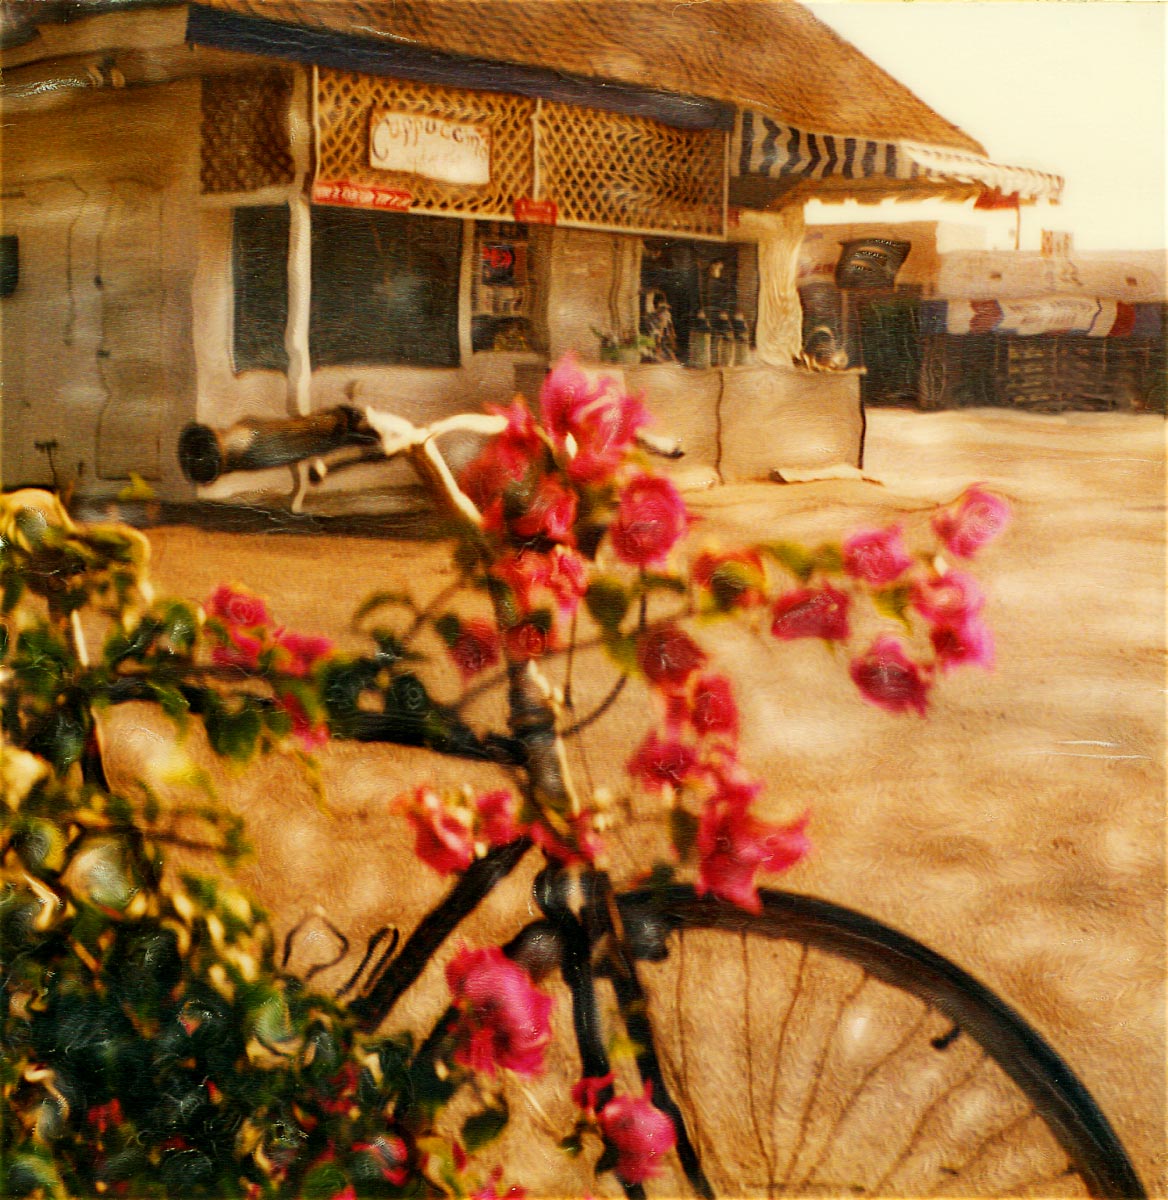 "Expresso Coffee Drive-Thru" <br> With Bike and Bougainvilla, Ft Lauderdale, FL